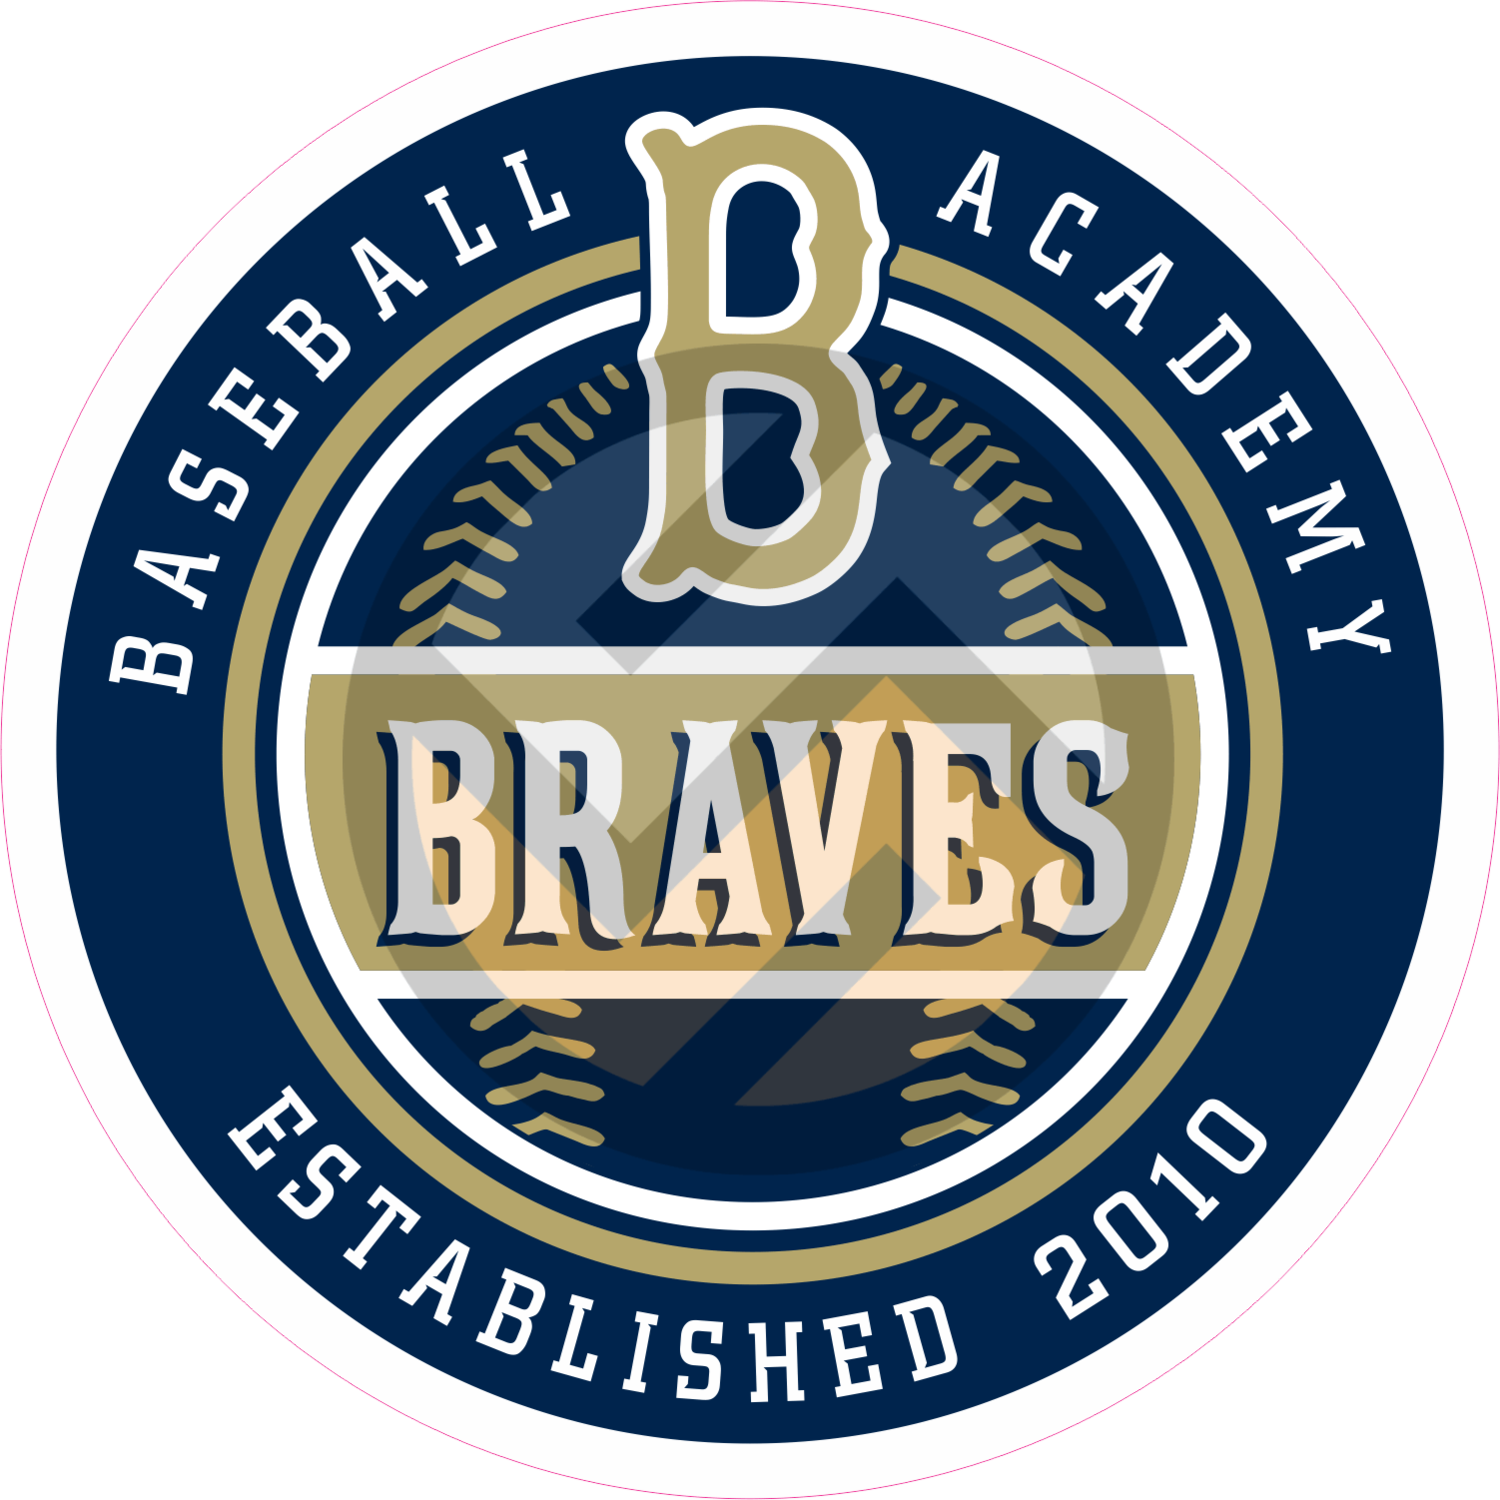 Bagger Sports Braves Baseball Academy Window Decal - Bagger Sports